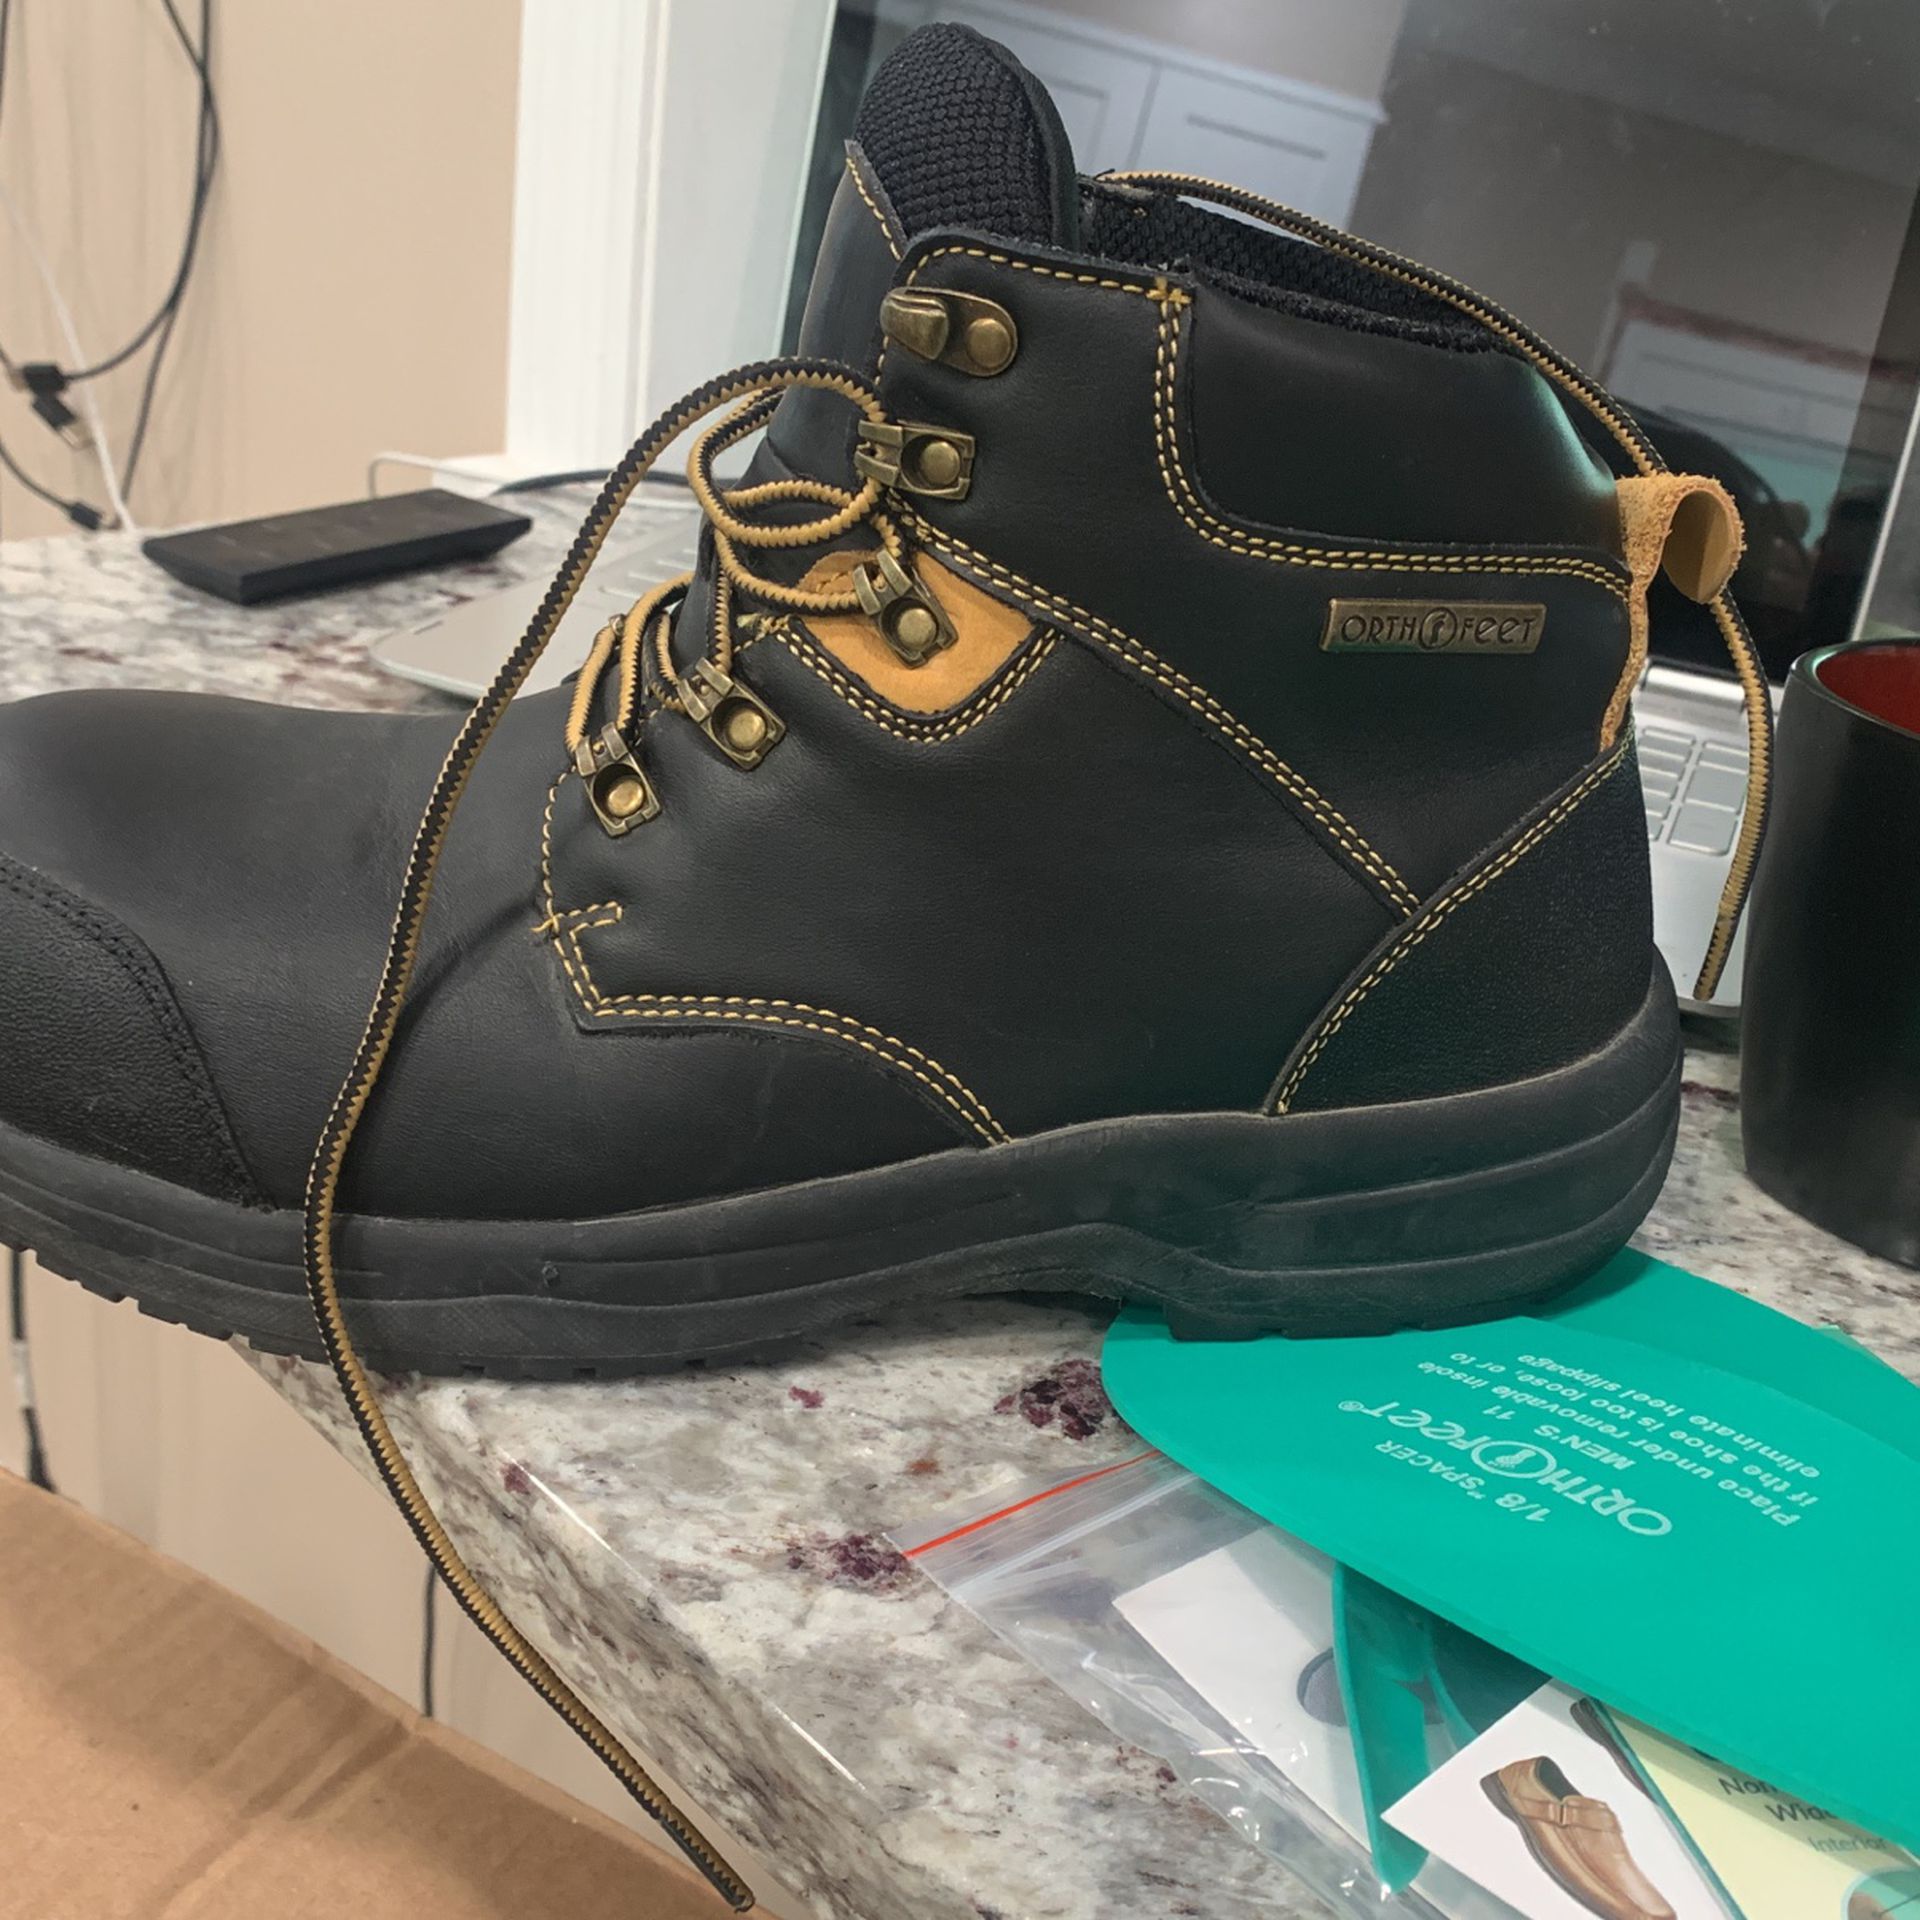 OrthoFeet $75 Work Boots Size 11 2EWater Proof Reinforce Toe